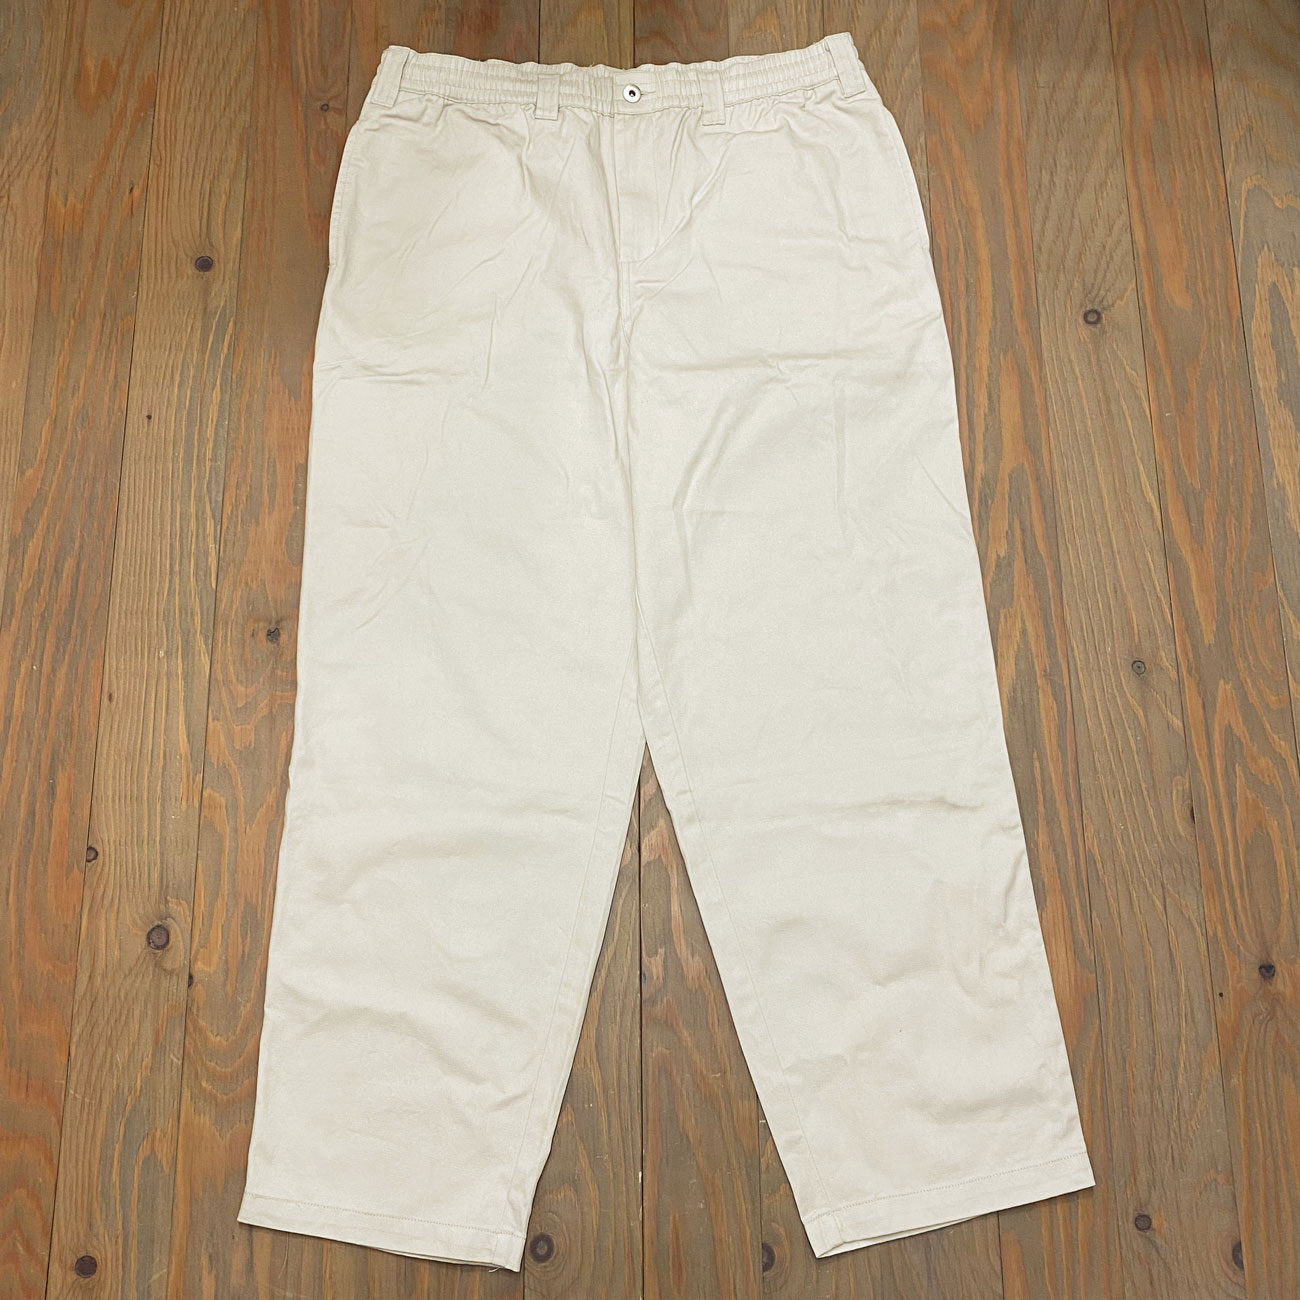 THEORIES STAMP LOUNGE PANTS IVORY